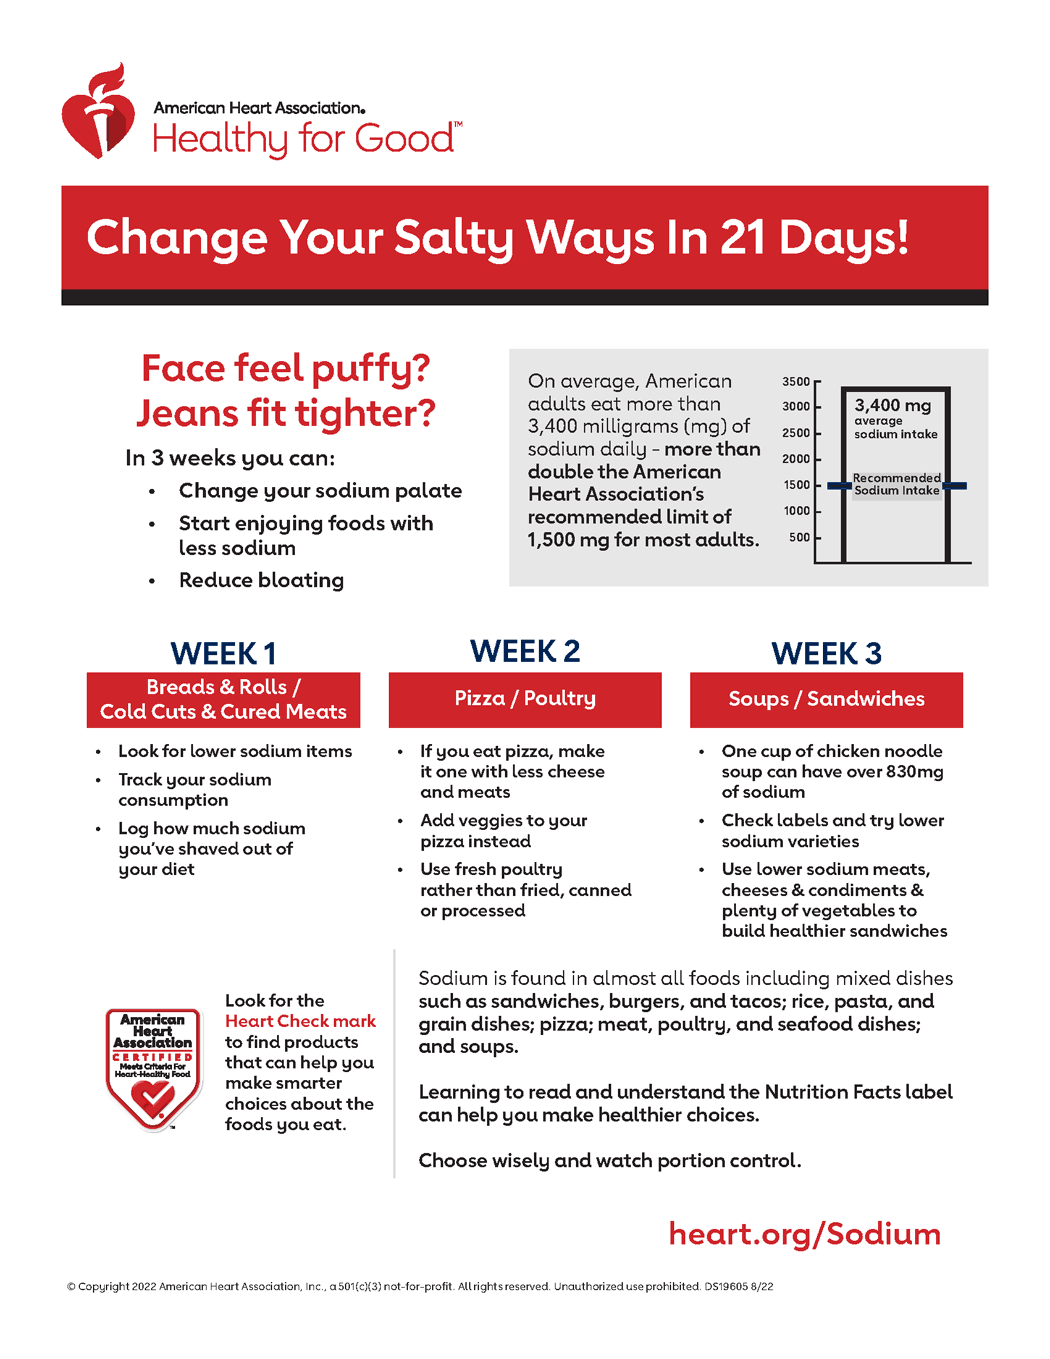 Sodium Swap - Change your salty ways in 21 days infographic